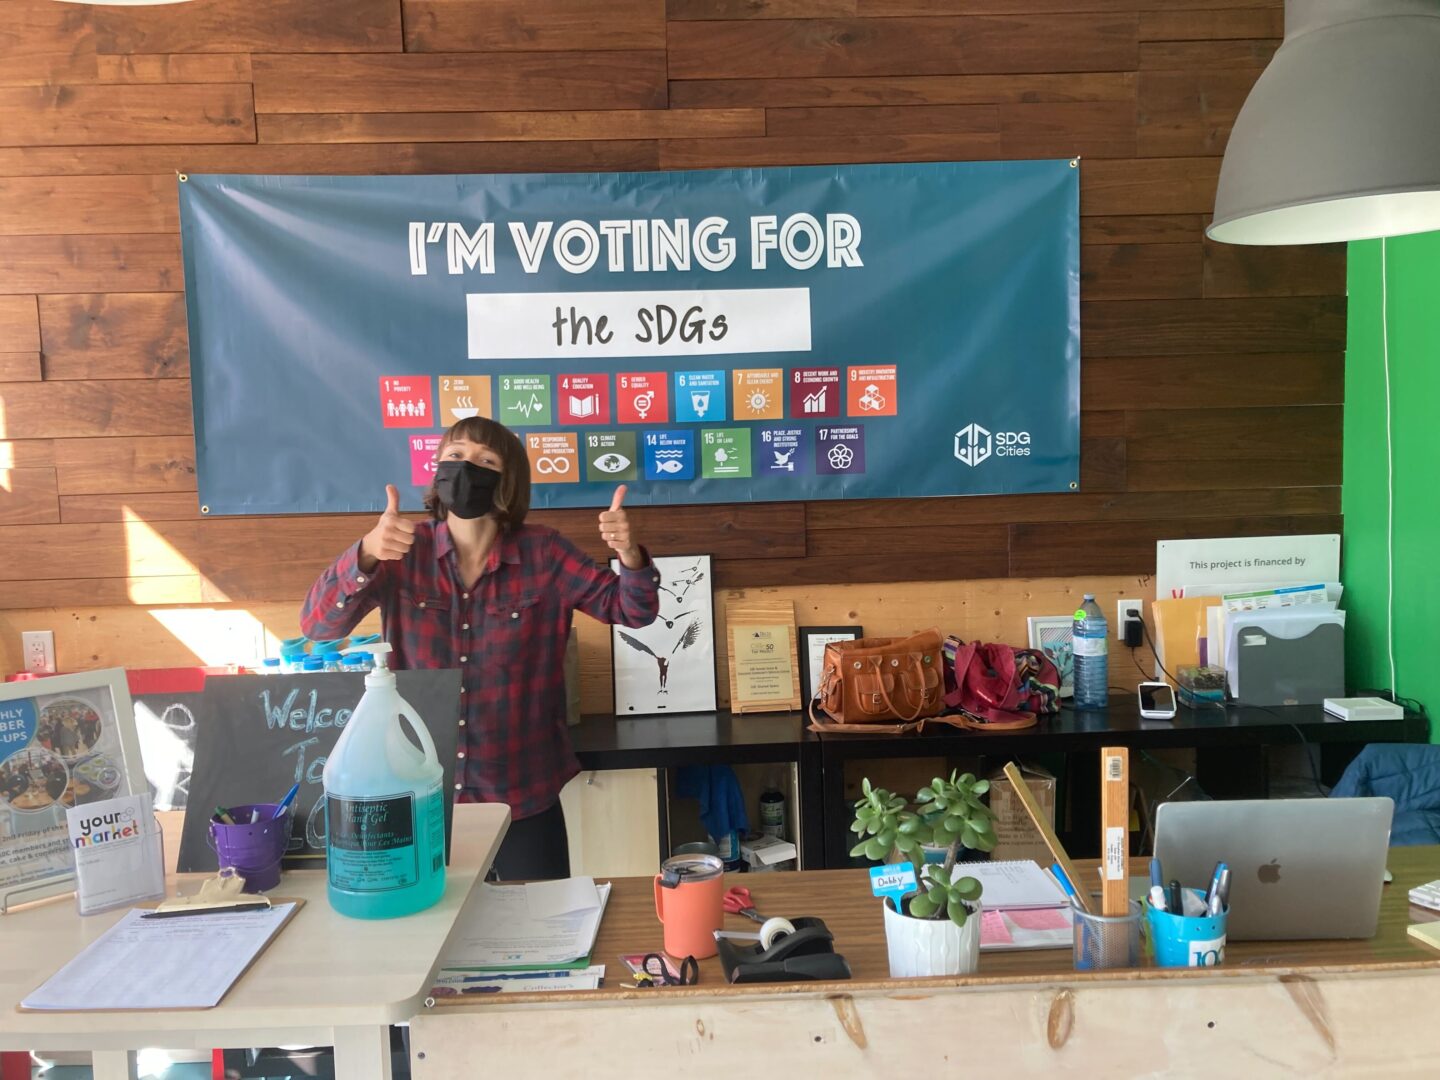 Person giving a thumbs up behind a receiption desk in front of a banner reading 'Vote for the SDGs'.